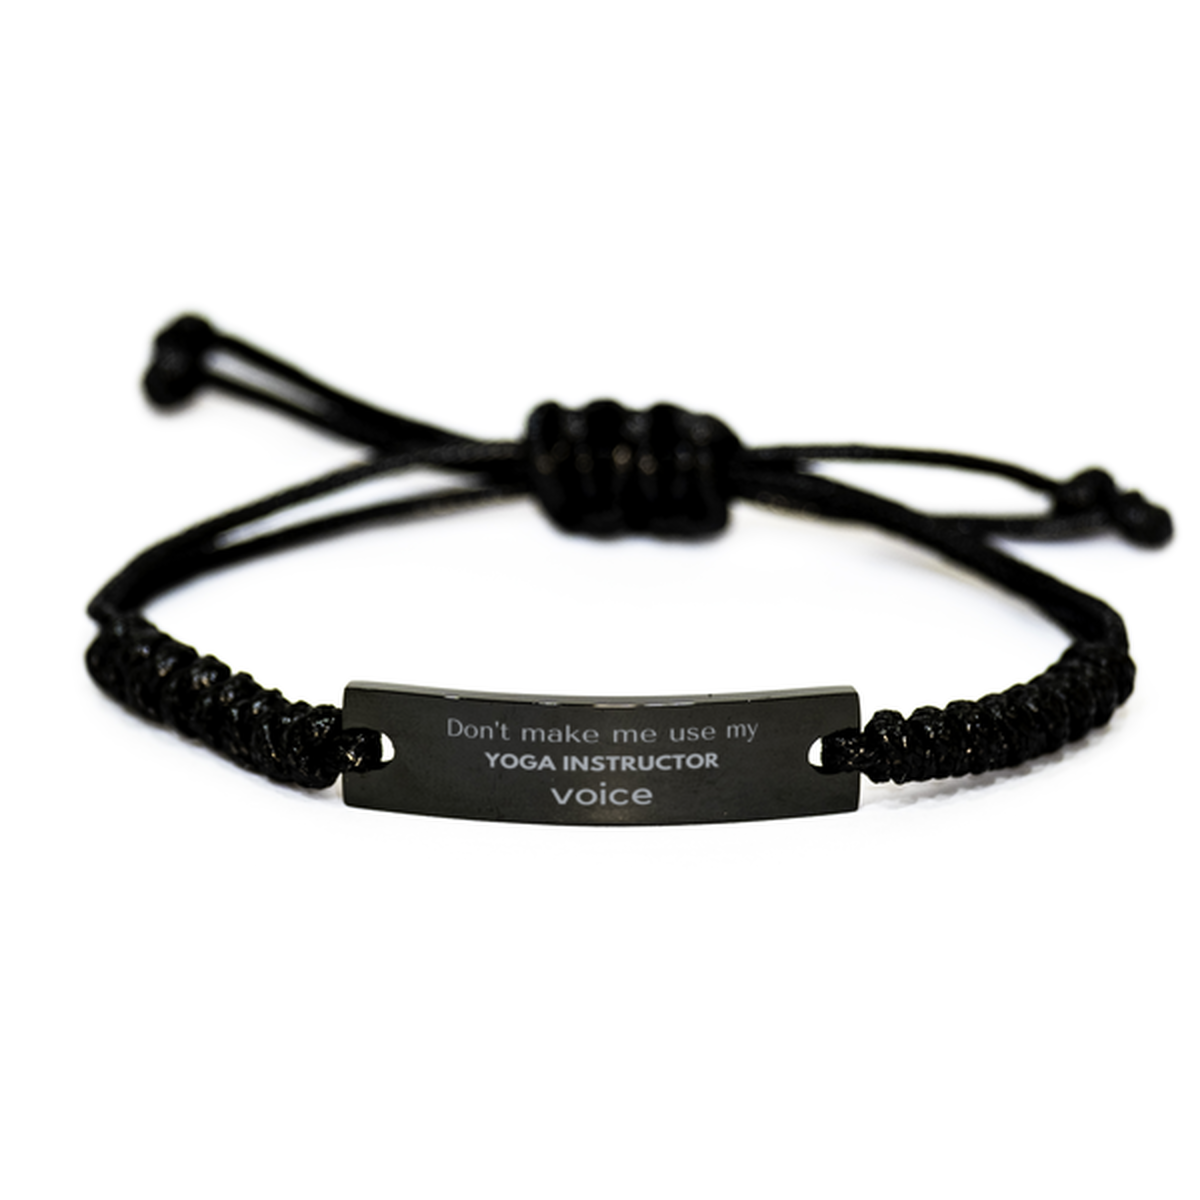 Don't make me use my Yoga Instructor voice, Sarcasm Yoga Instructor Gifts, Christmas Yoga Instructor Black Rope Bracelet Birthday Unique Gifts For Yoga Instructor Coworkers, Men, Women, Colleague, Friends